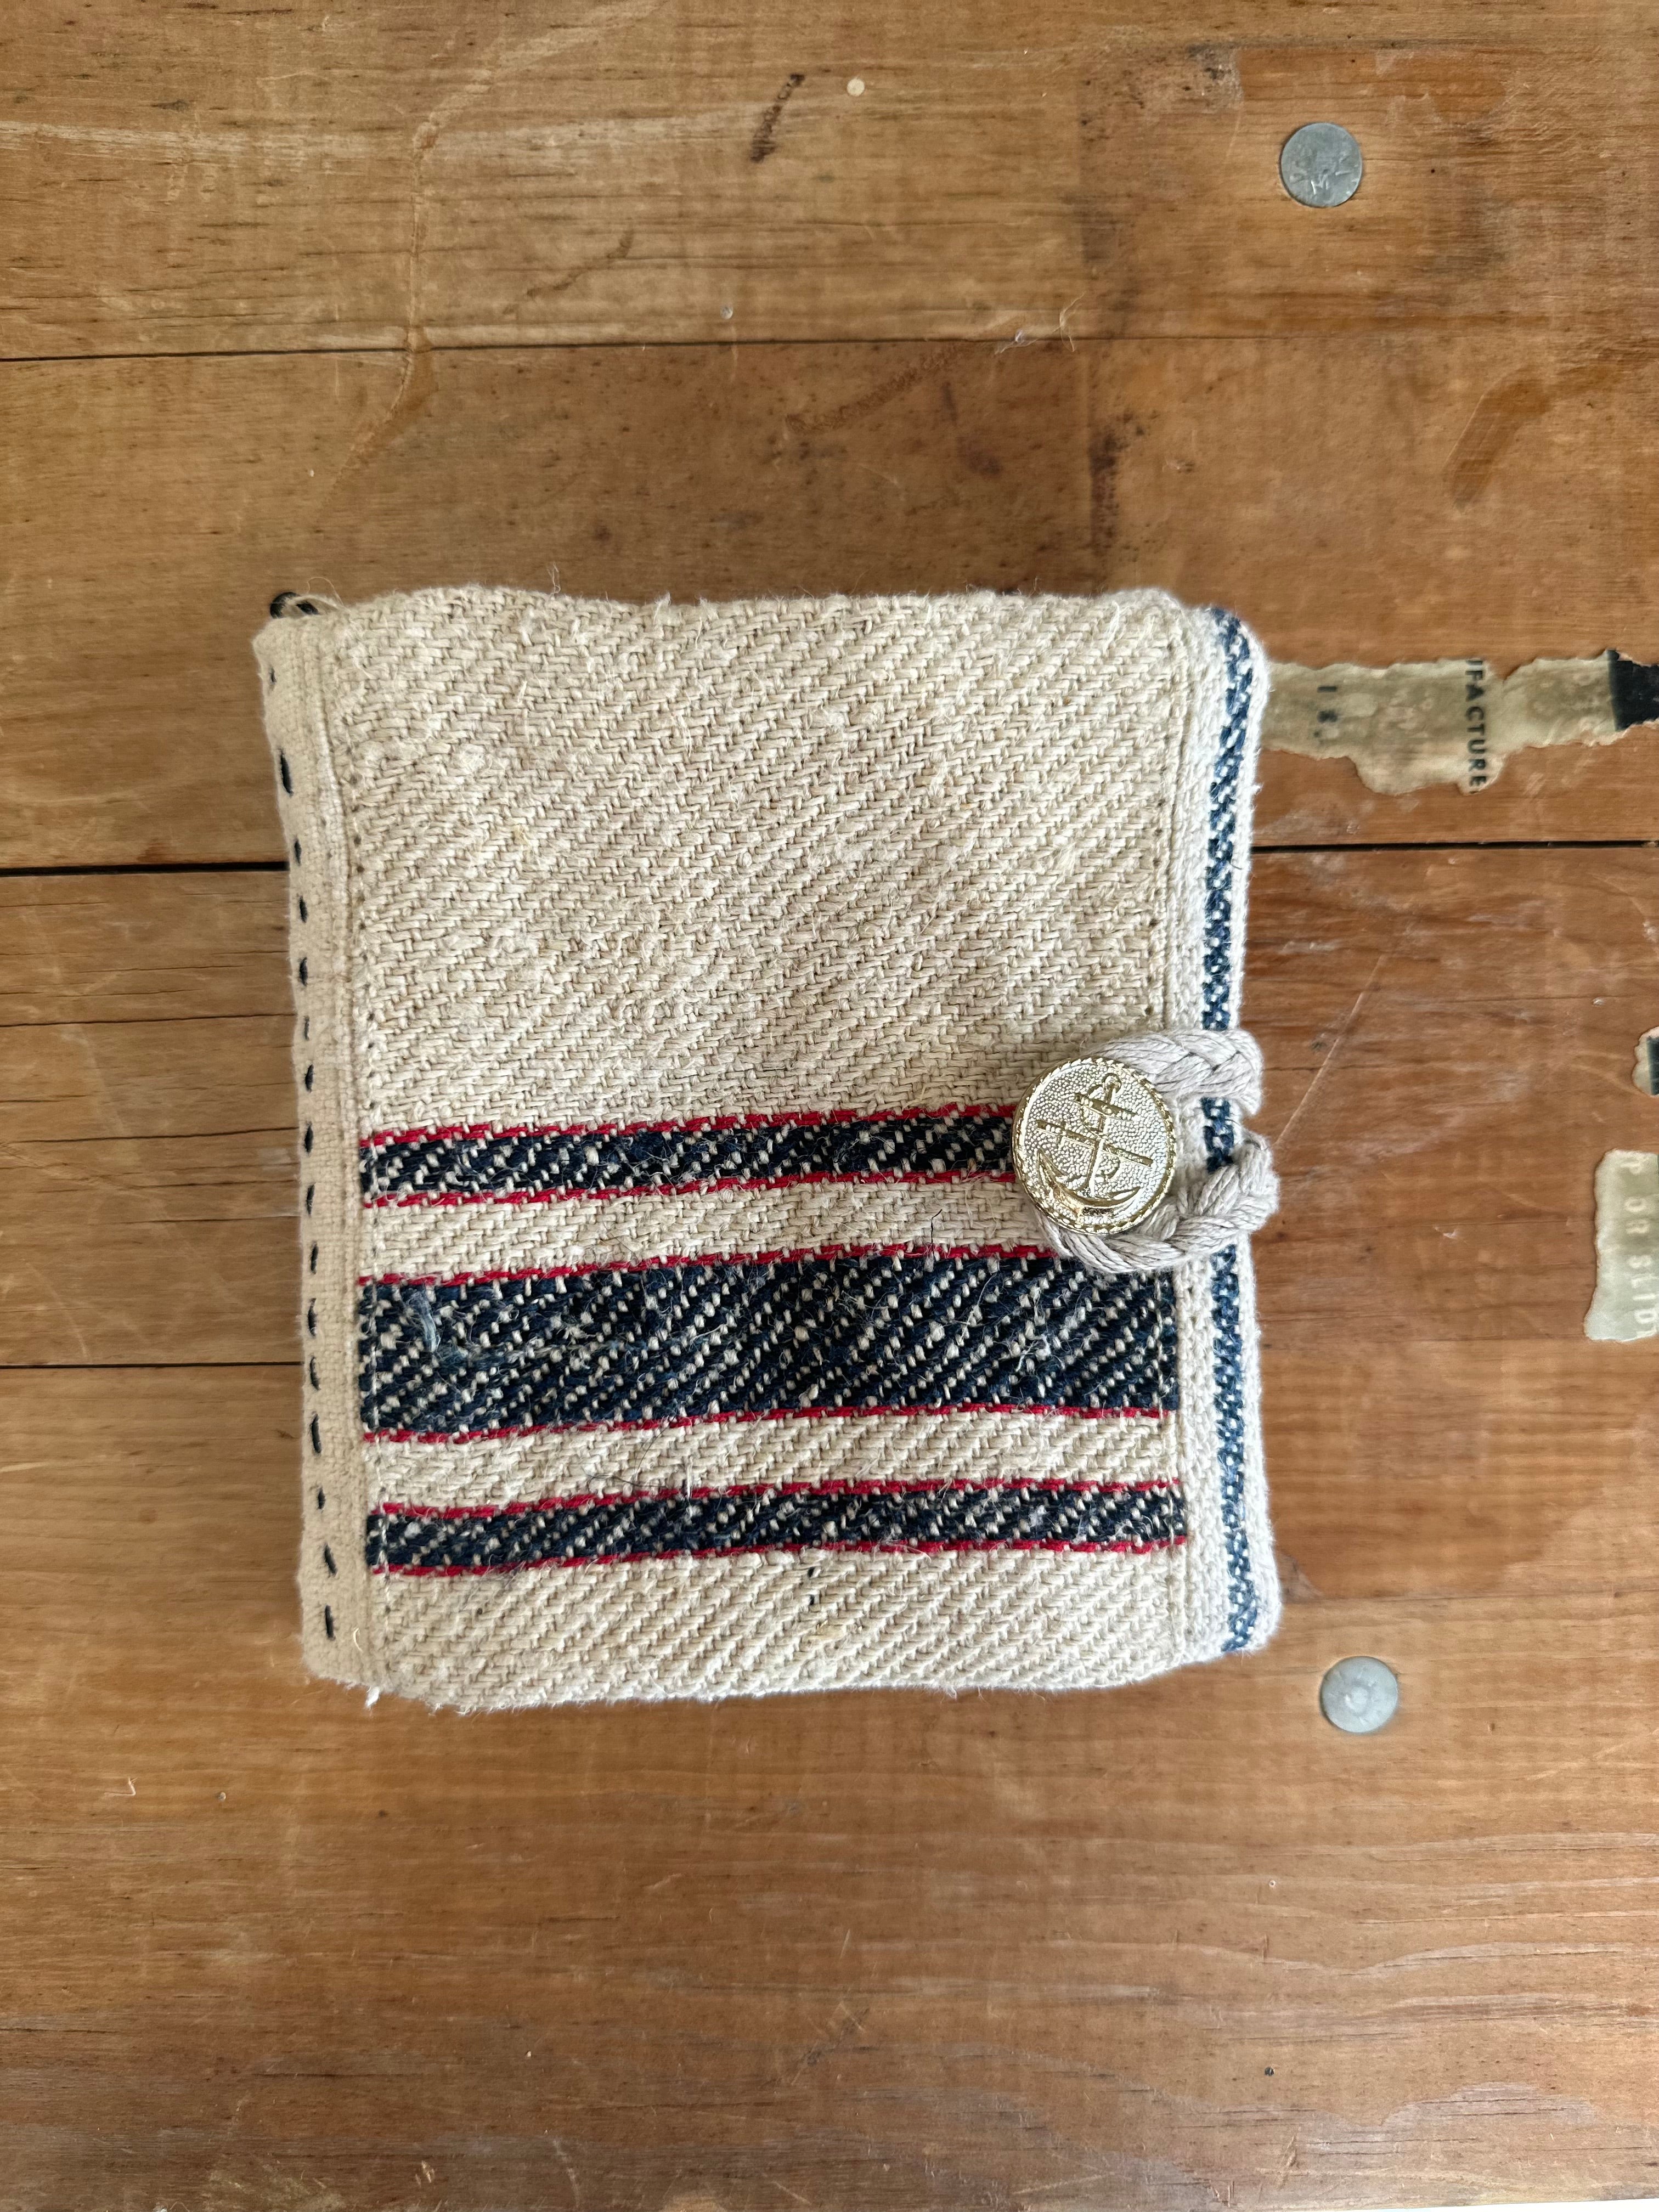 Patched grain- sack needle book case